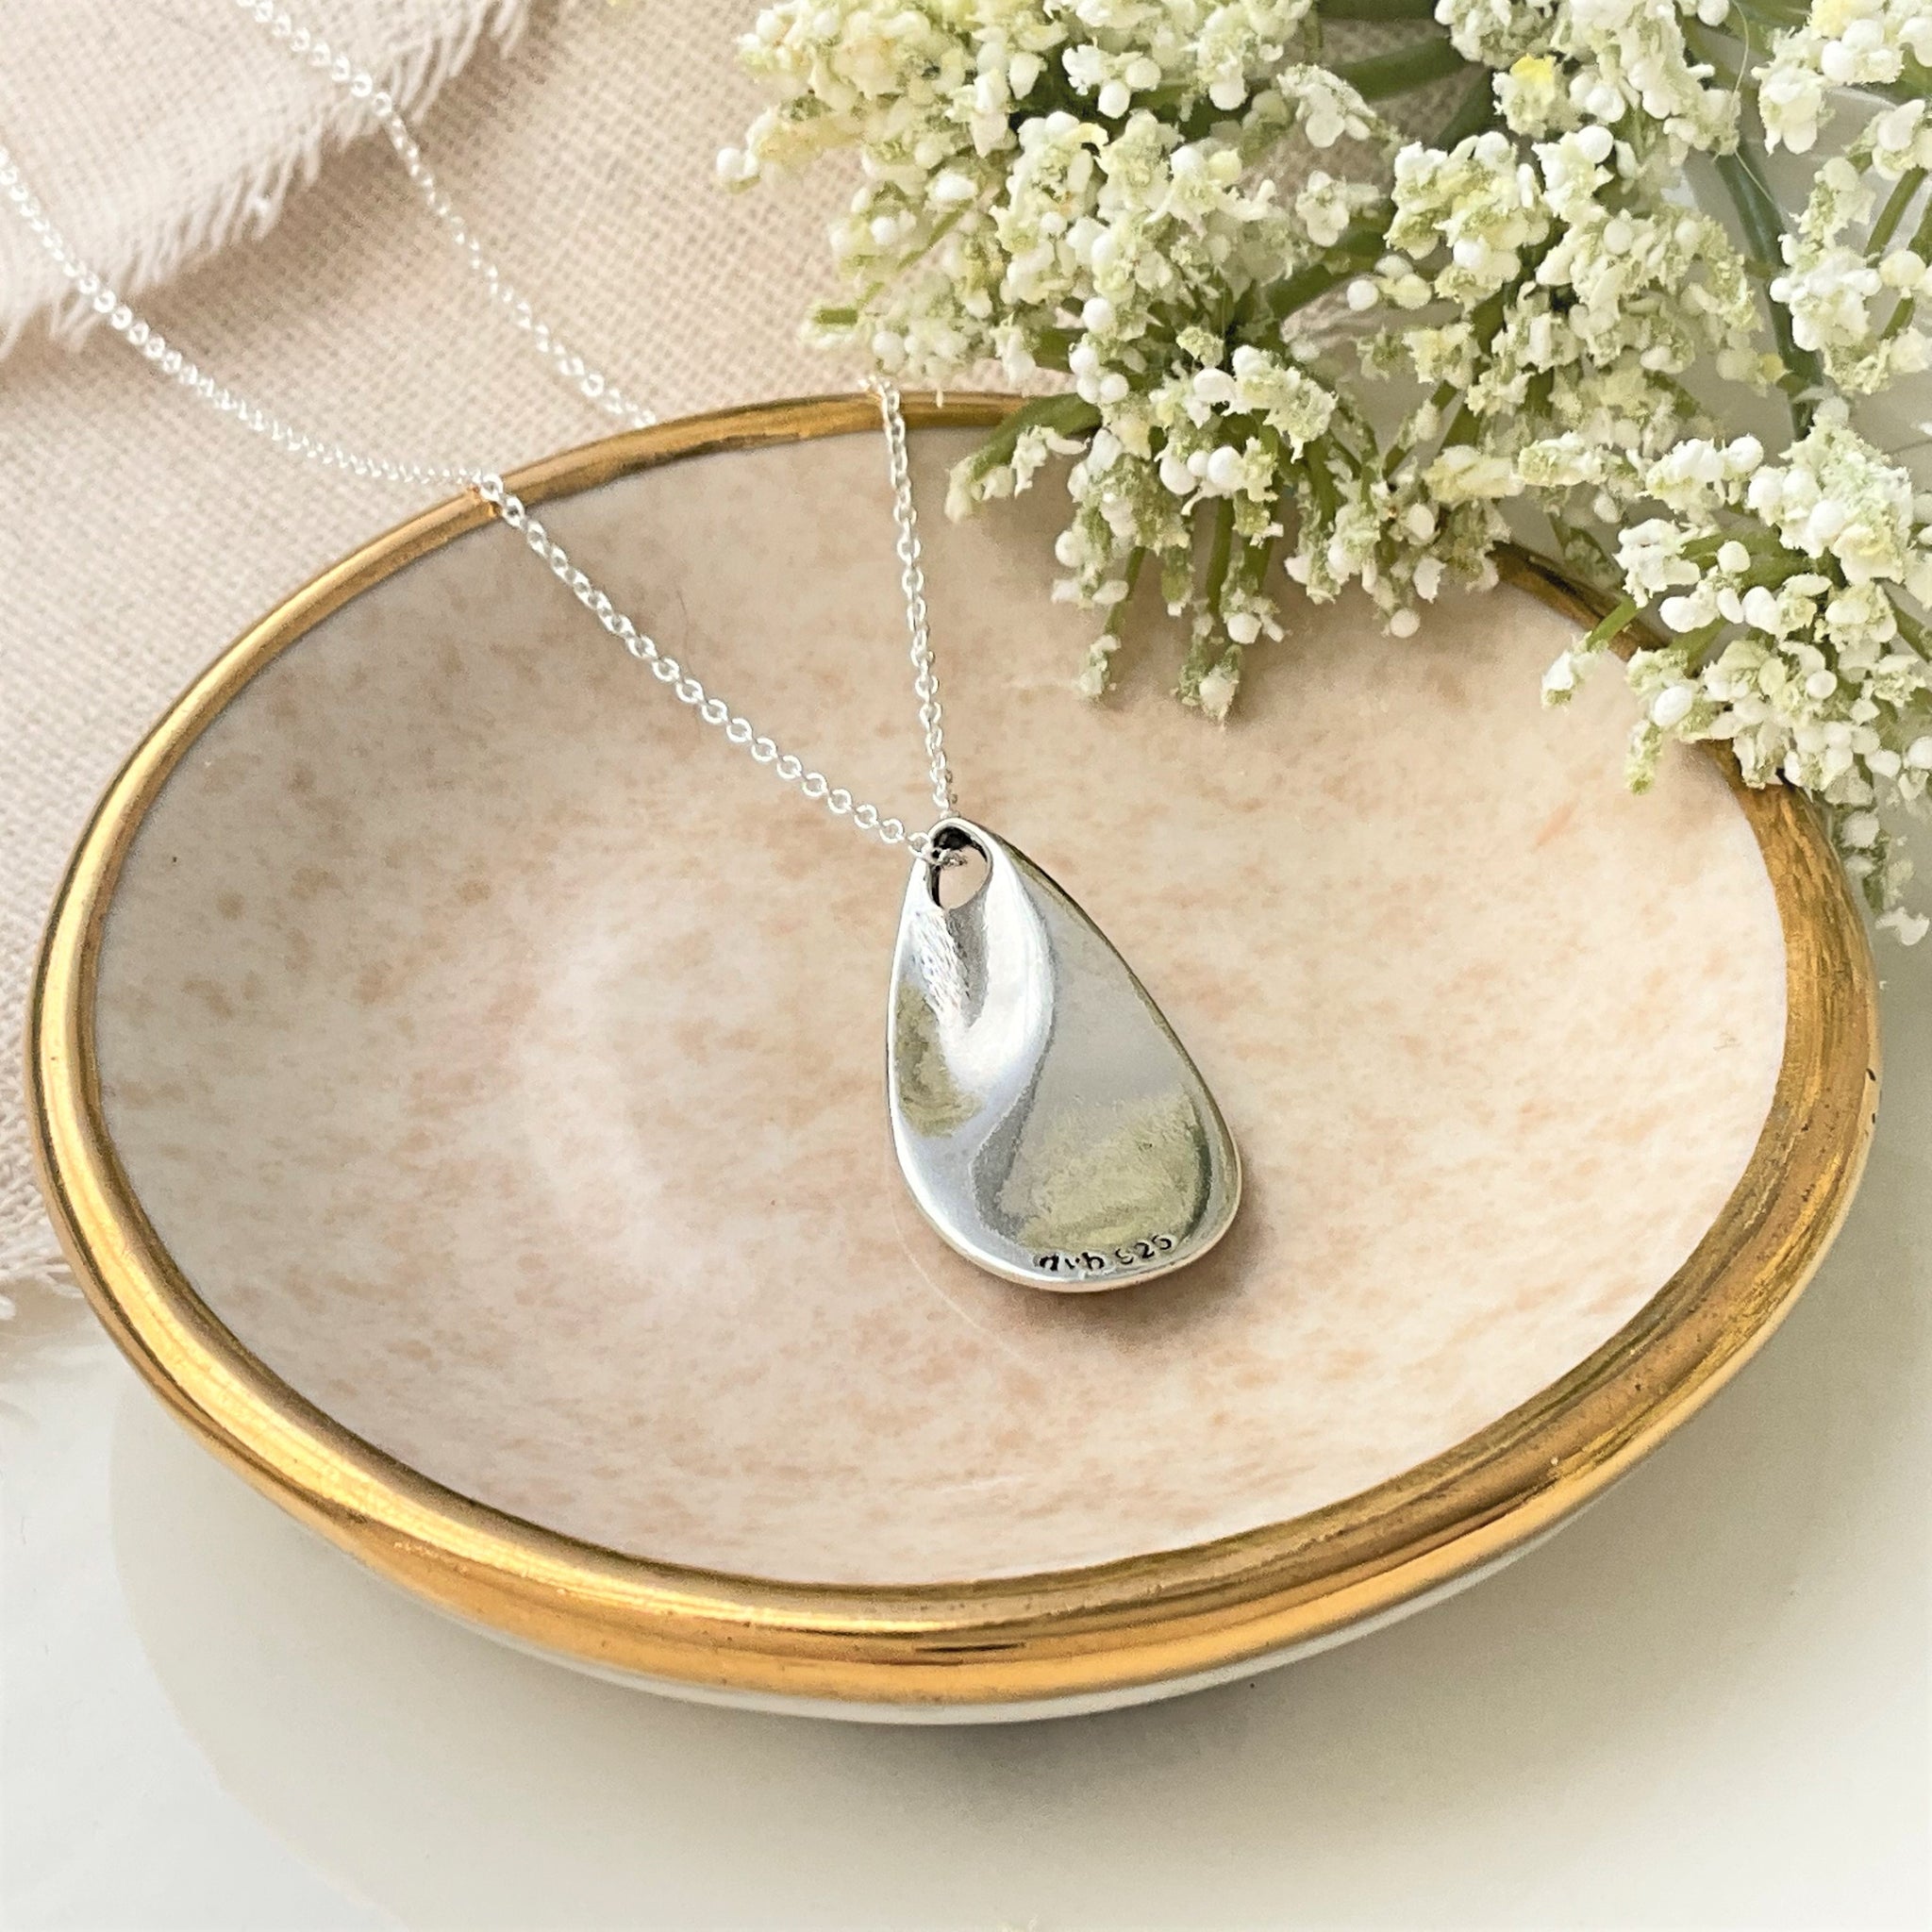 Teardrop Memorial Cremation Jewelry for Ashes Urn Necklace for Ashe of  Loved One | eBay